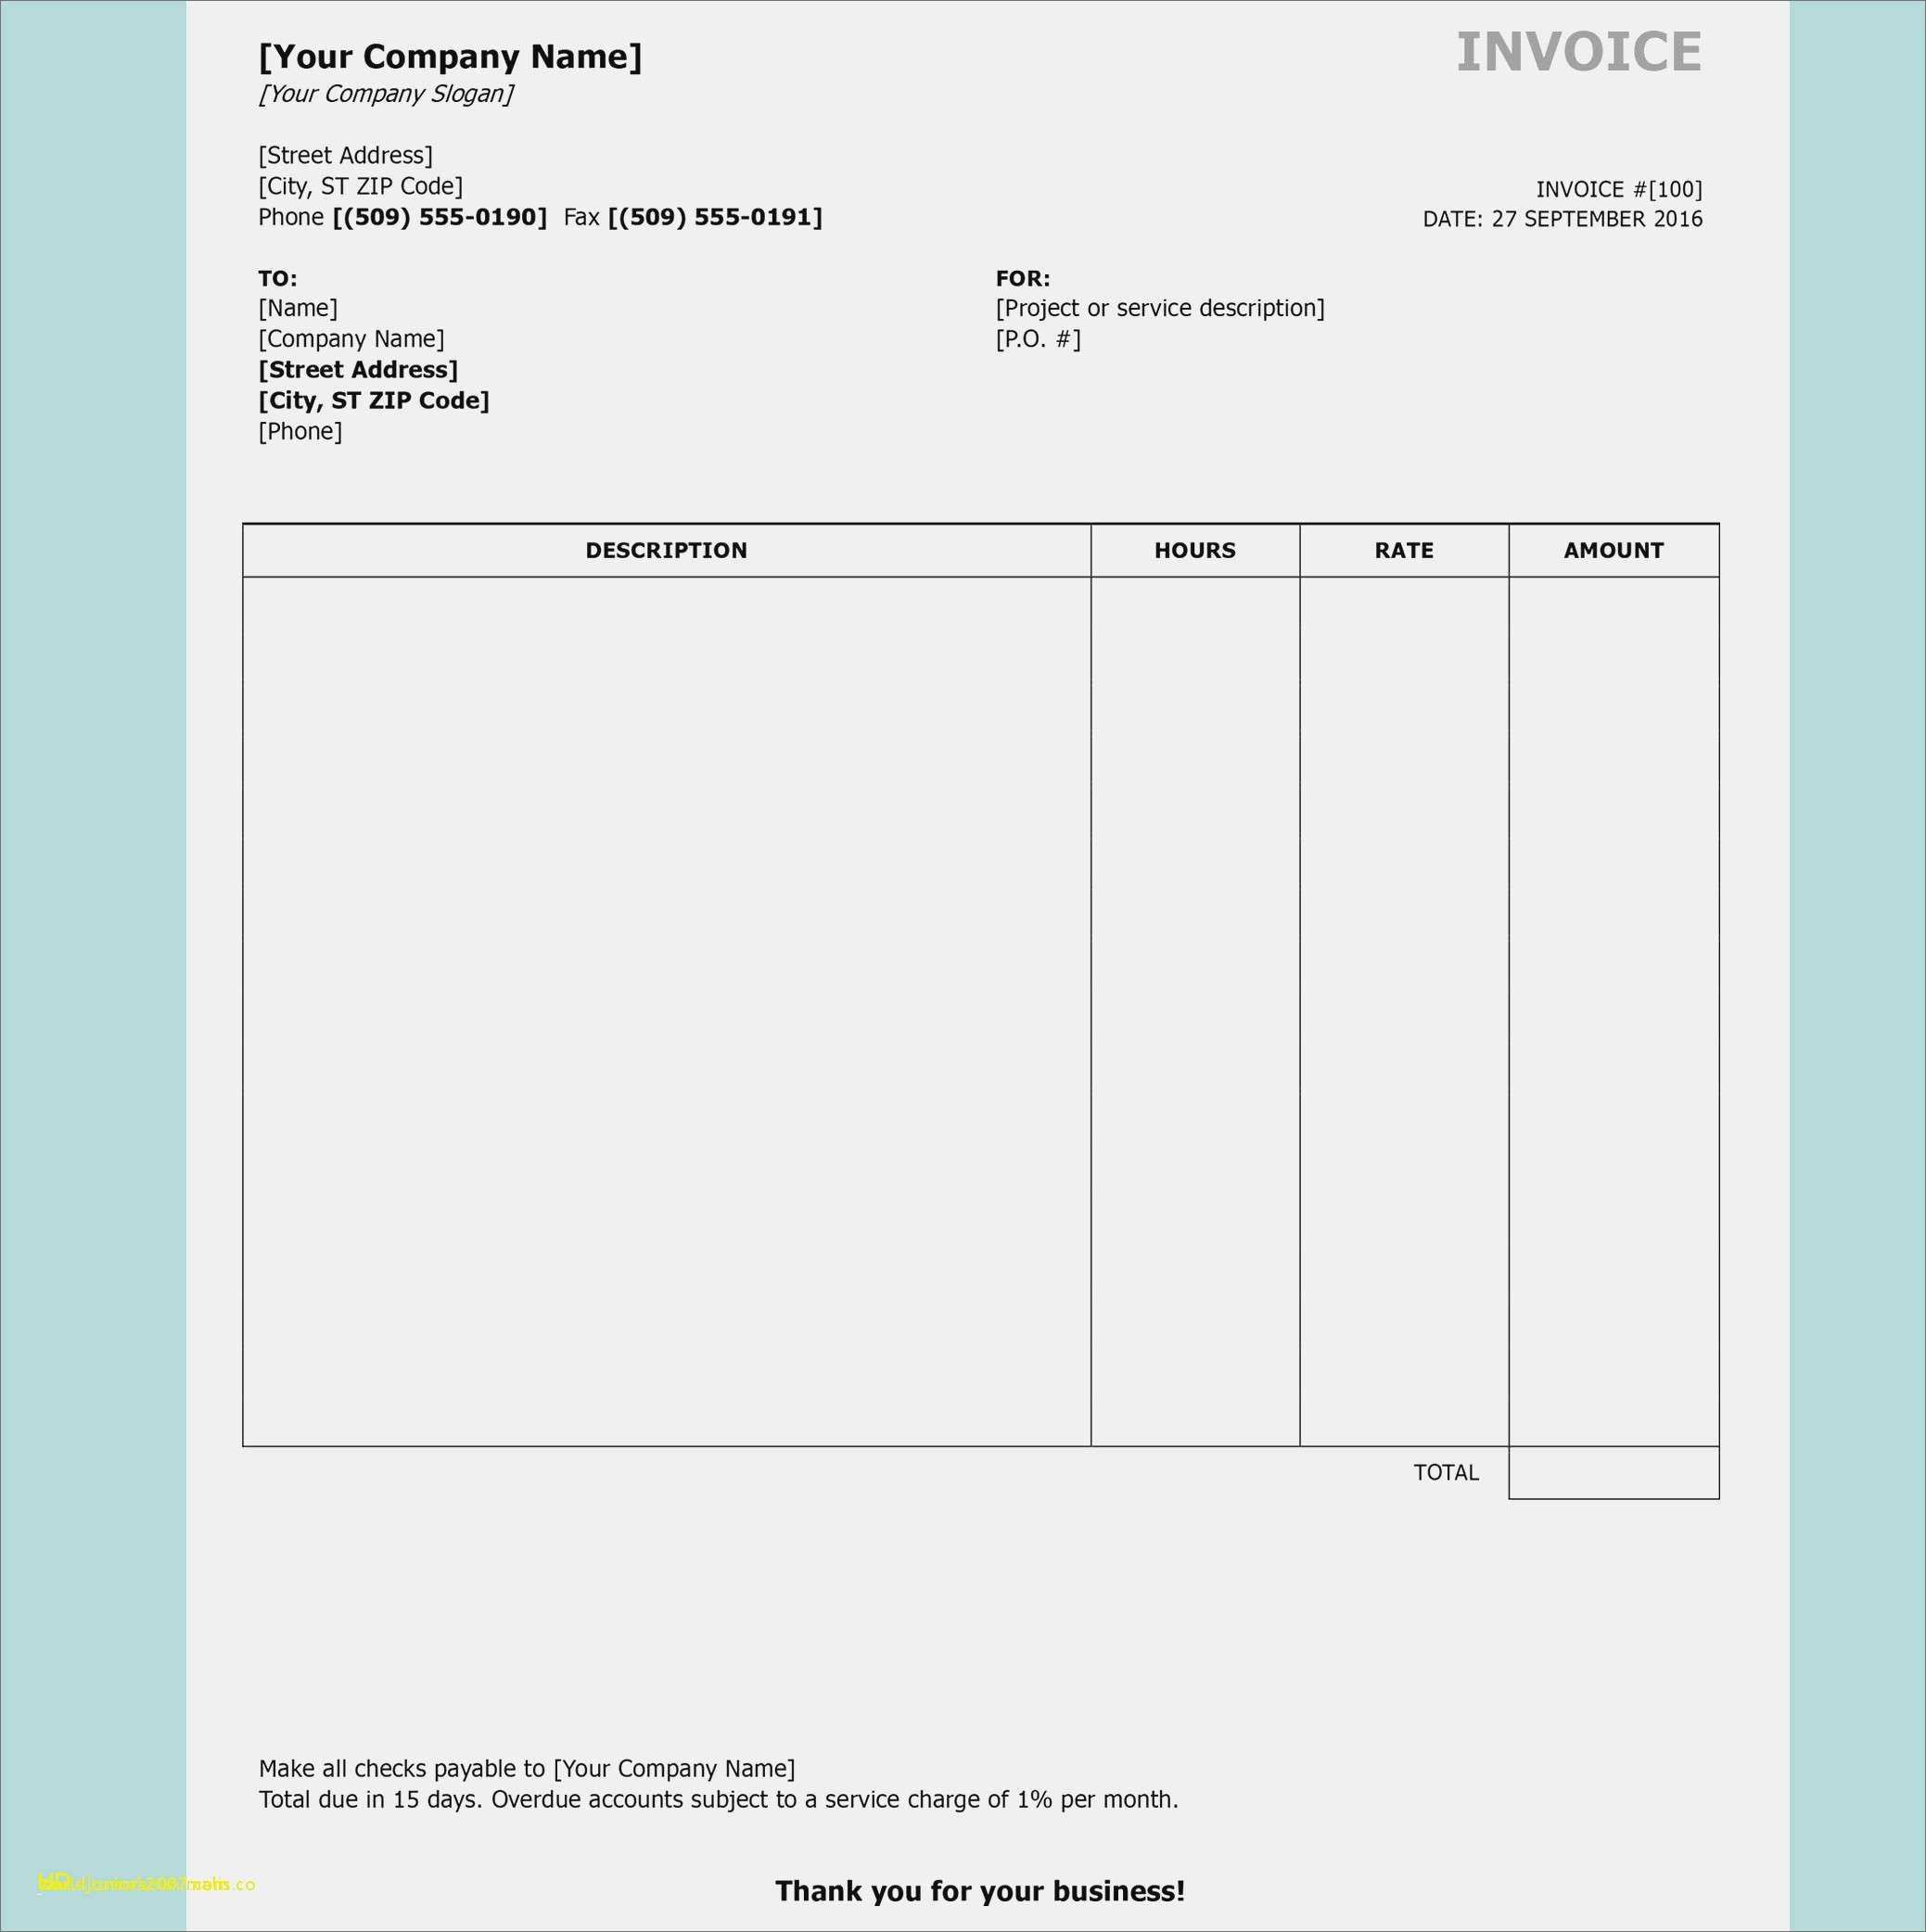 Tax Invoice Statement Template Cards Design Templates